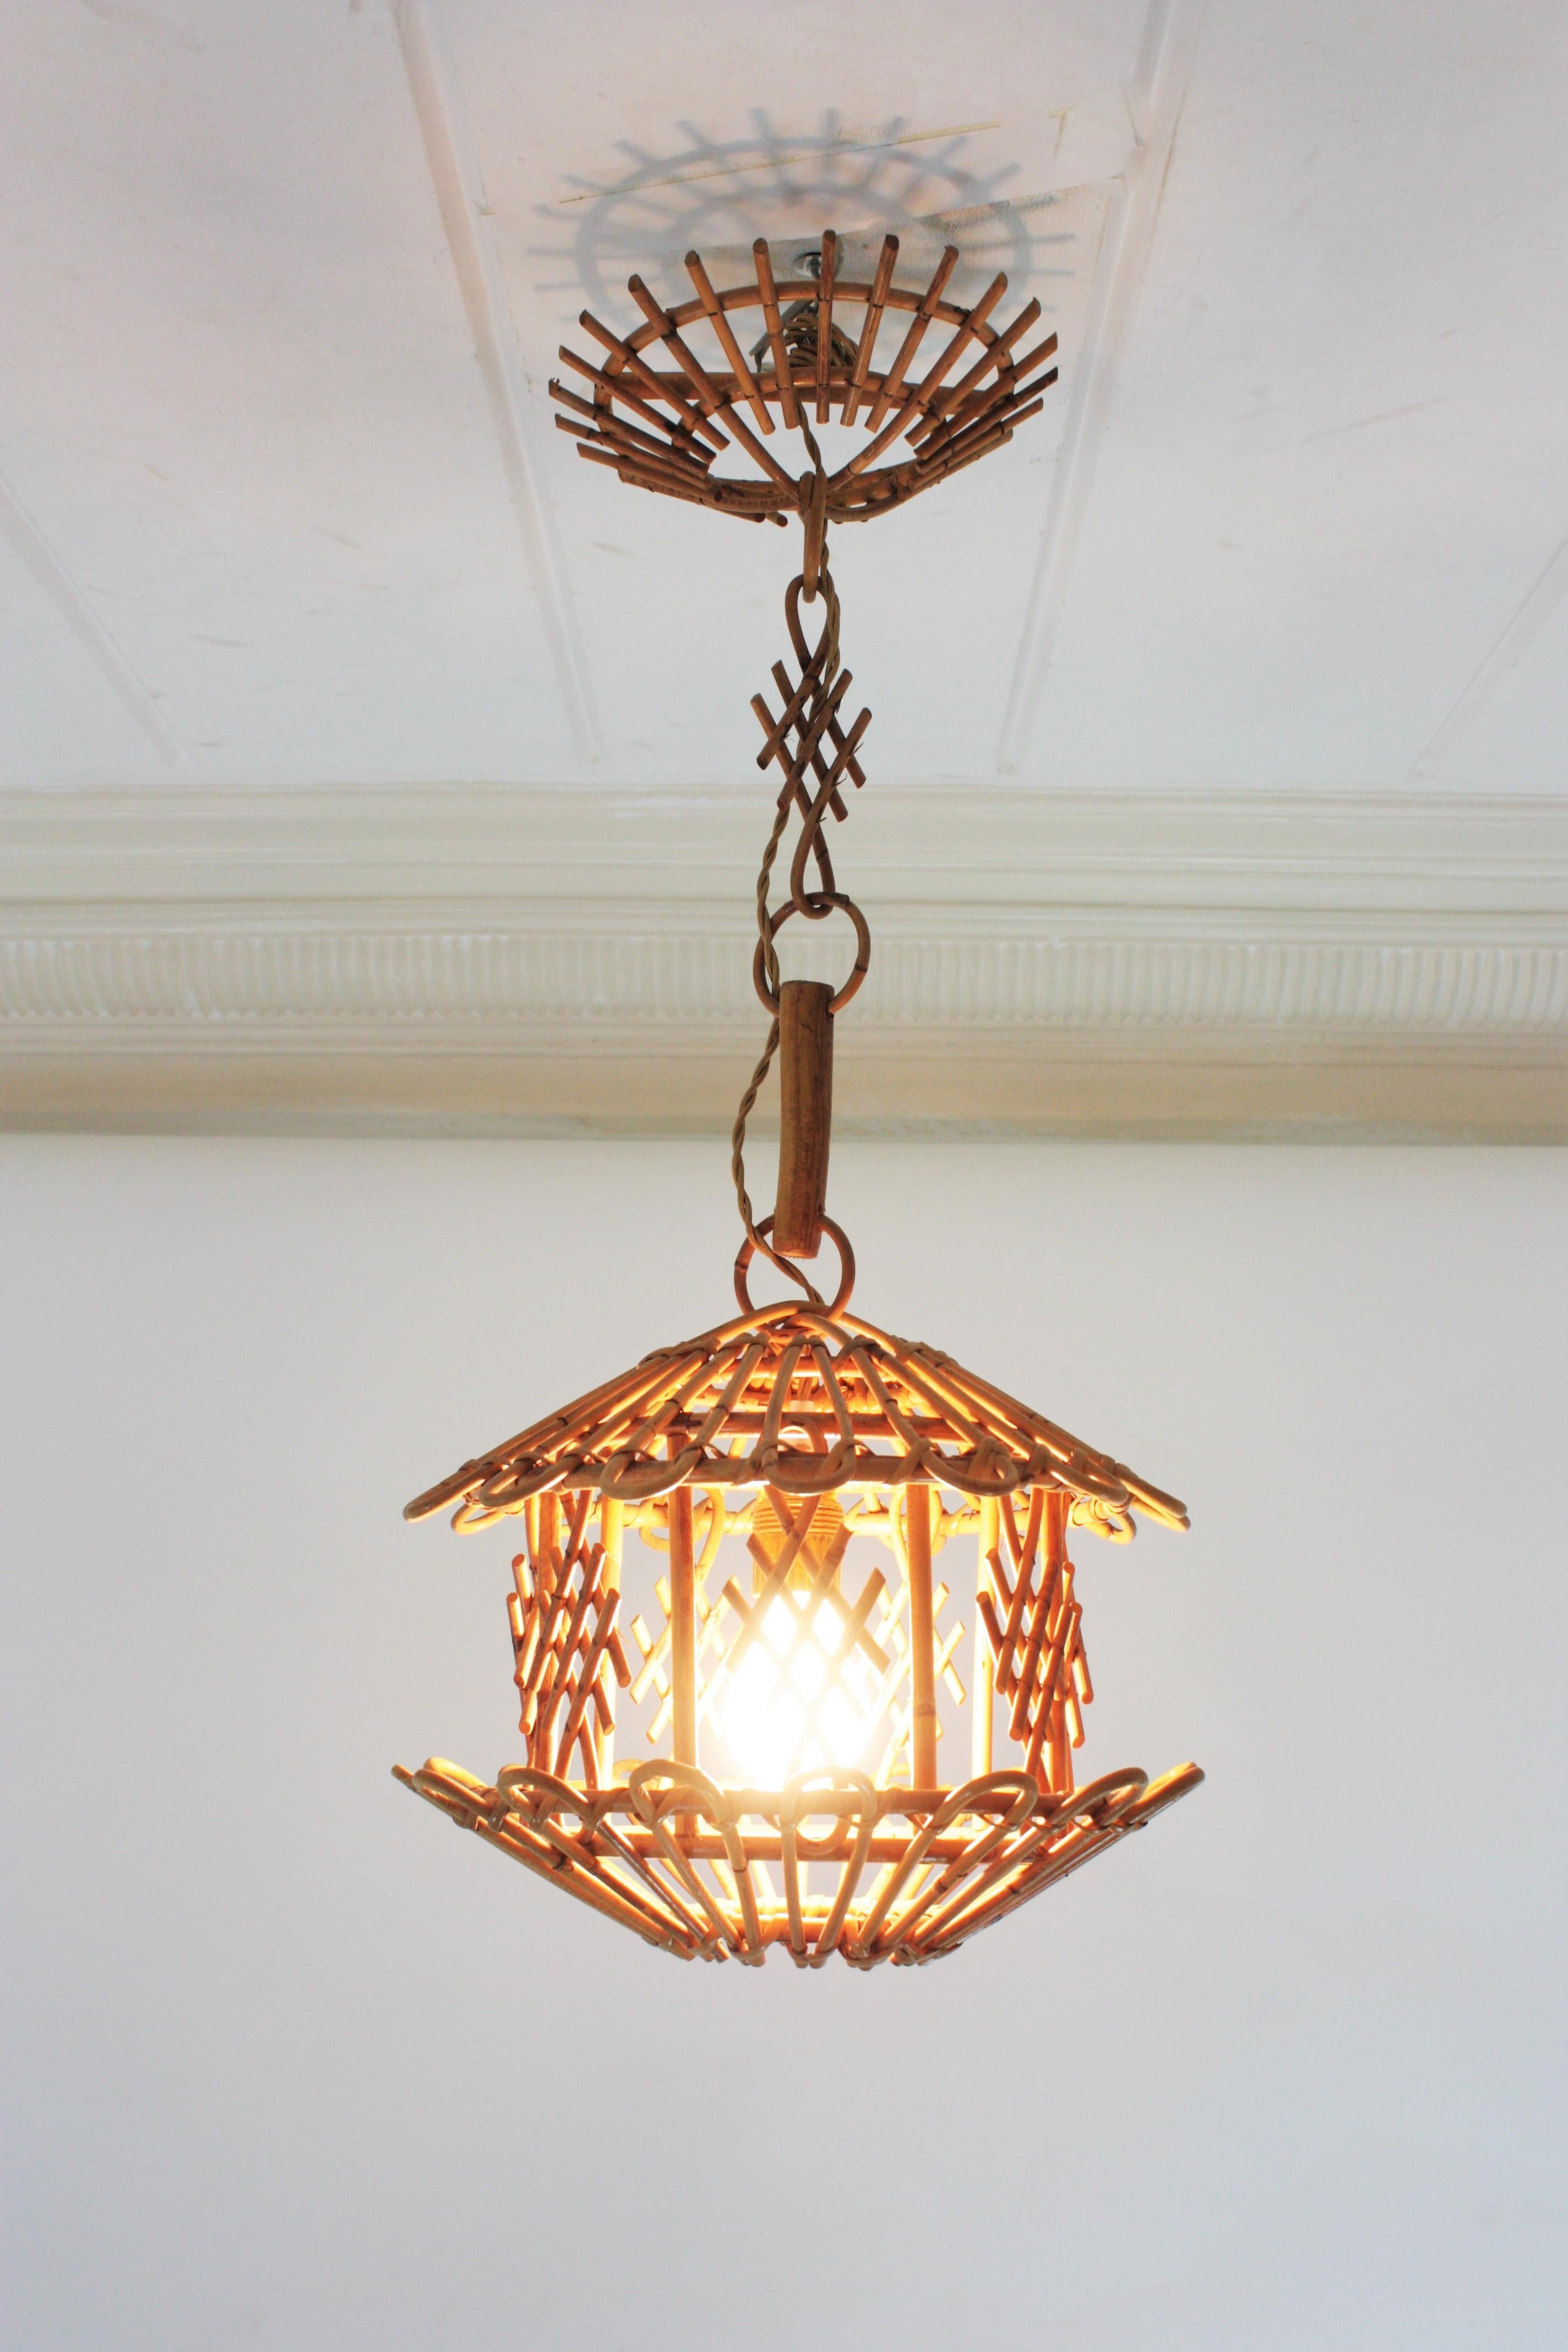 Hand-Crafted French Modernist Rattan Pendant Lantern / Hanging Light with Chinoiserie Accents